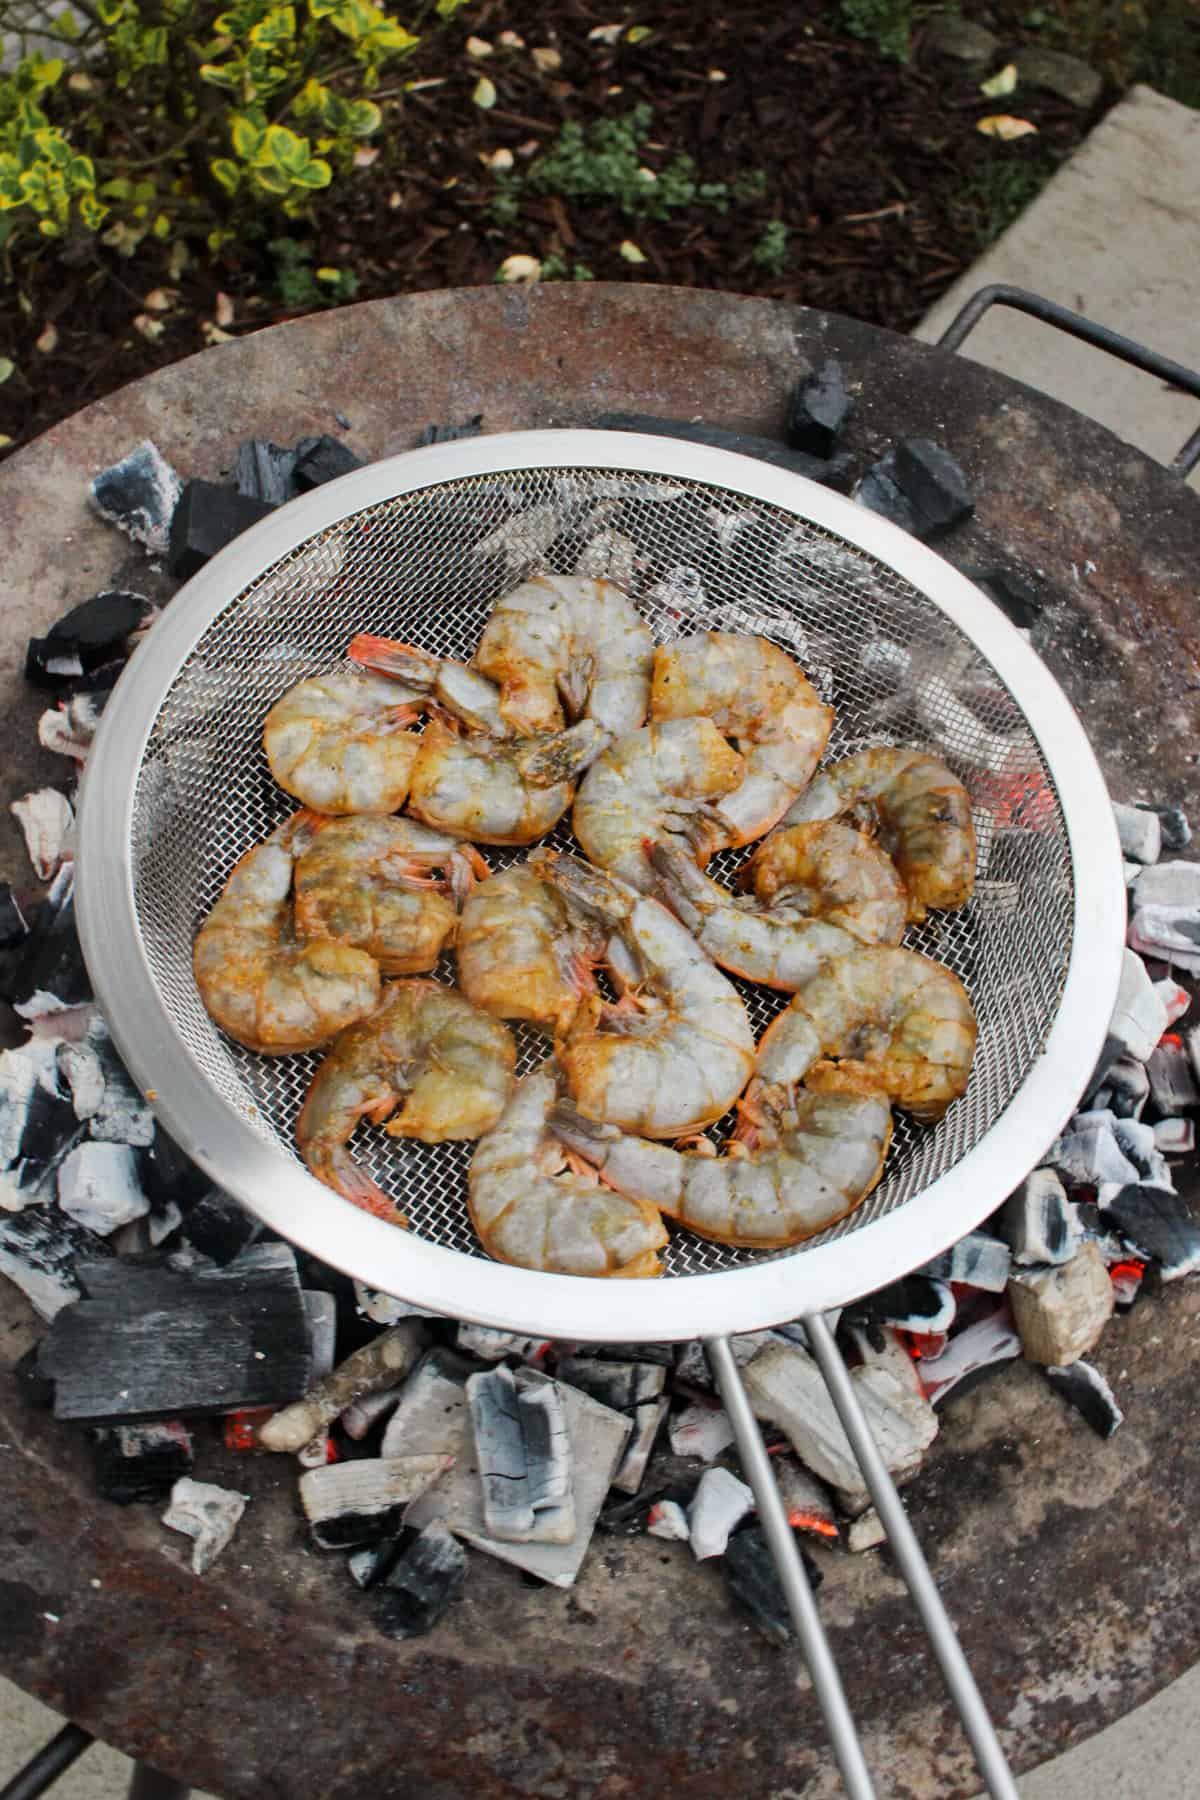 The raw shrimp getting started over the coals.